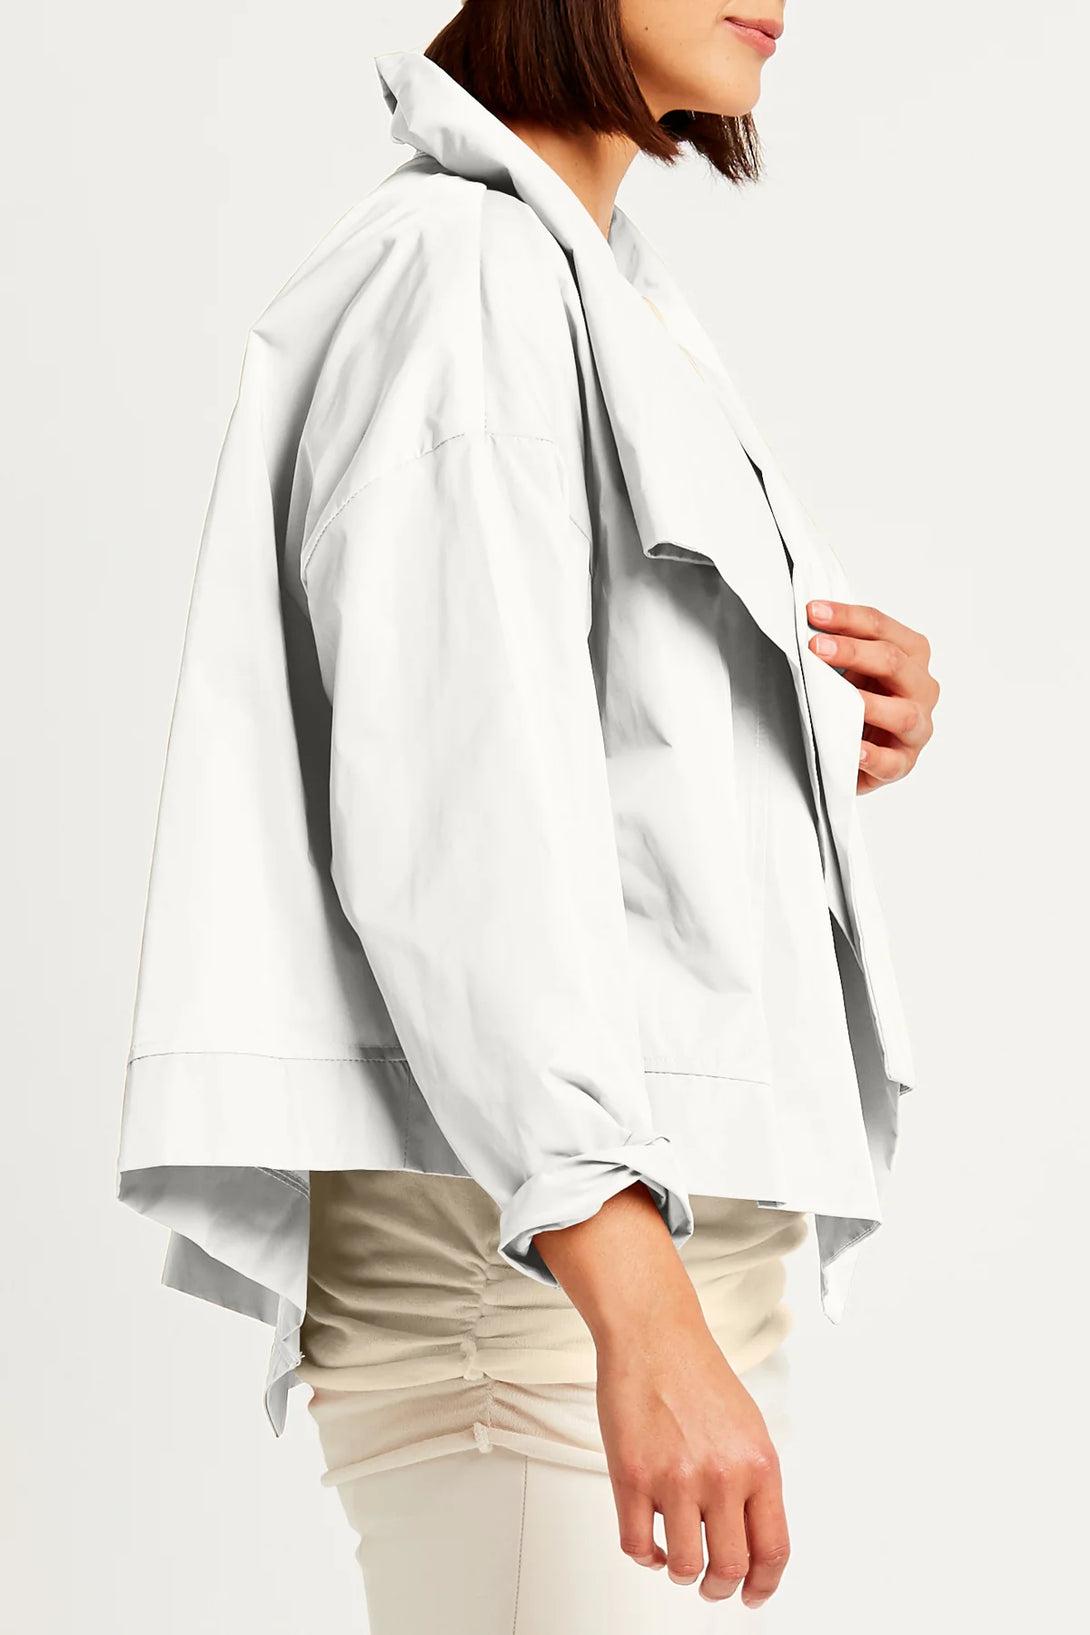 PLANET&nbsp;by Lauren G's Cropped Asymmetrical Jacket White